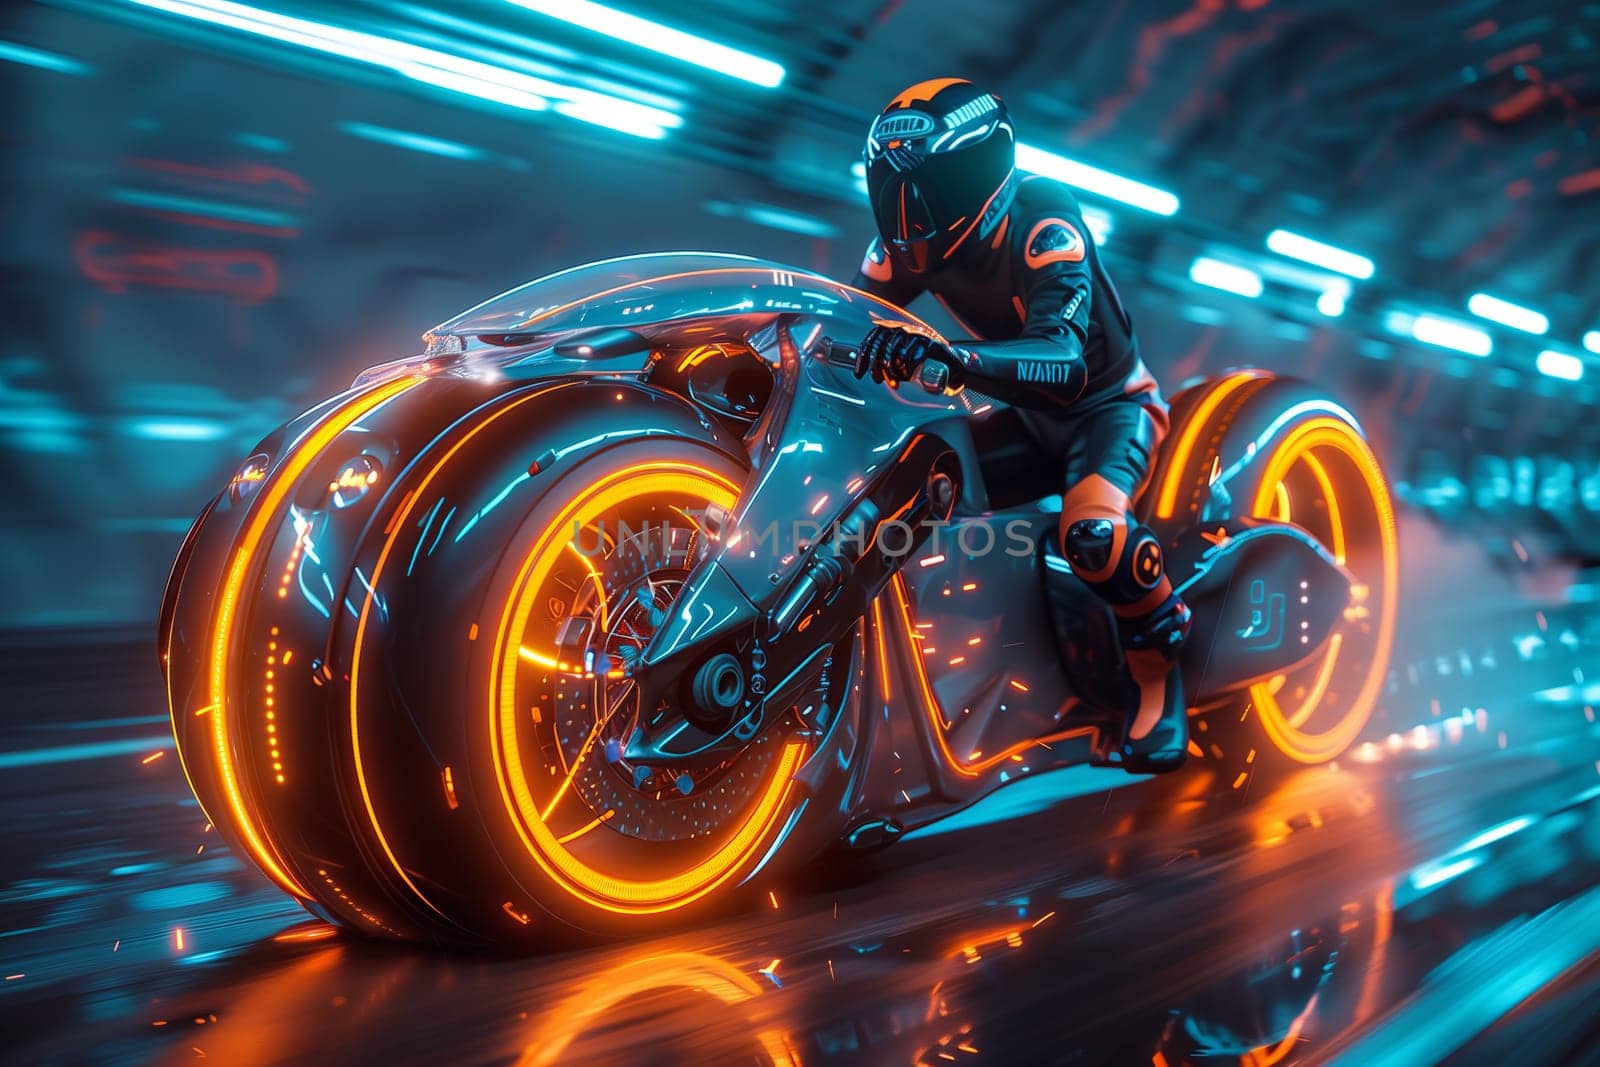 The man is riding a motorcycle with neon lights on the wheels, creating a futuristic and stylish look for the vehicle